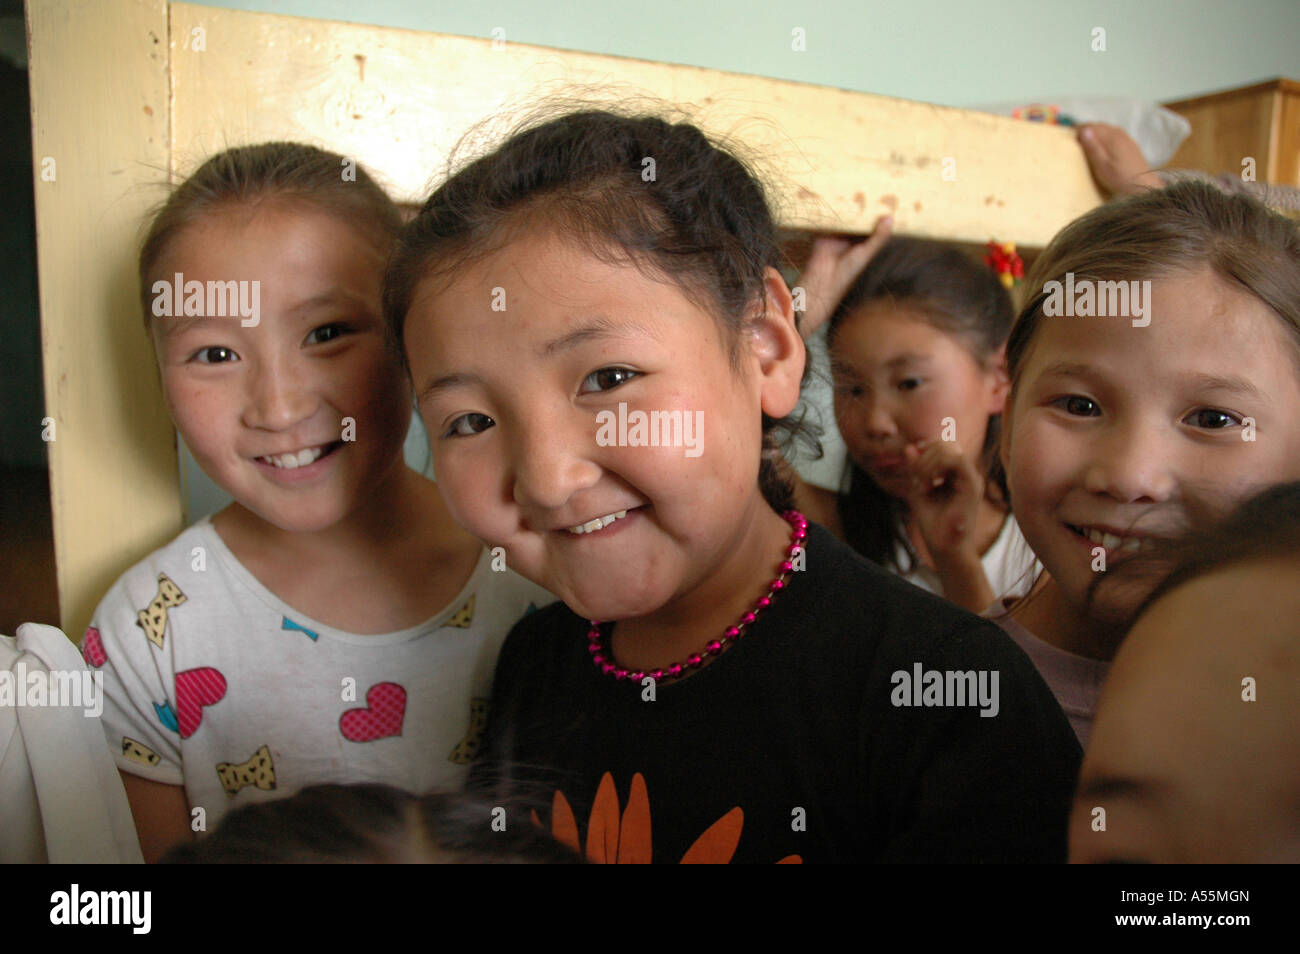 Painet is1503 mongolia verbist center for street children orphans ulaan baatar country developing nation less economically Stock Photo